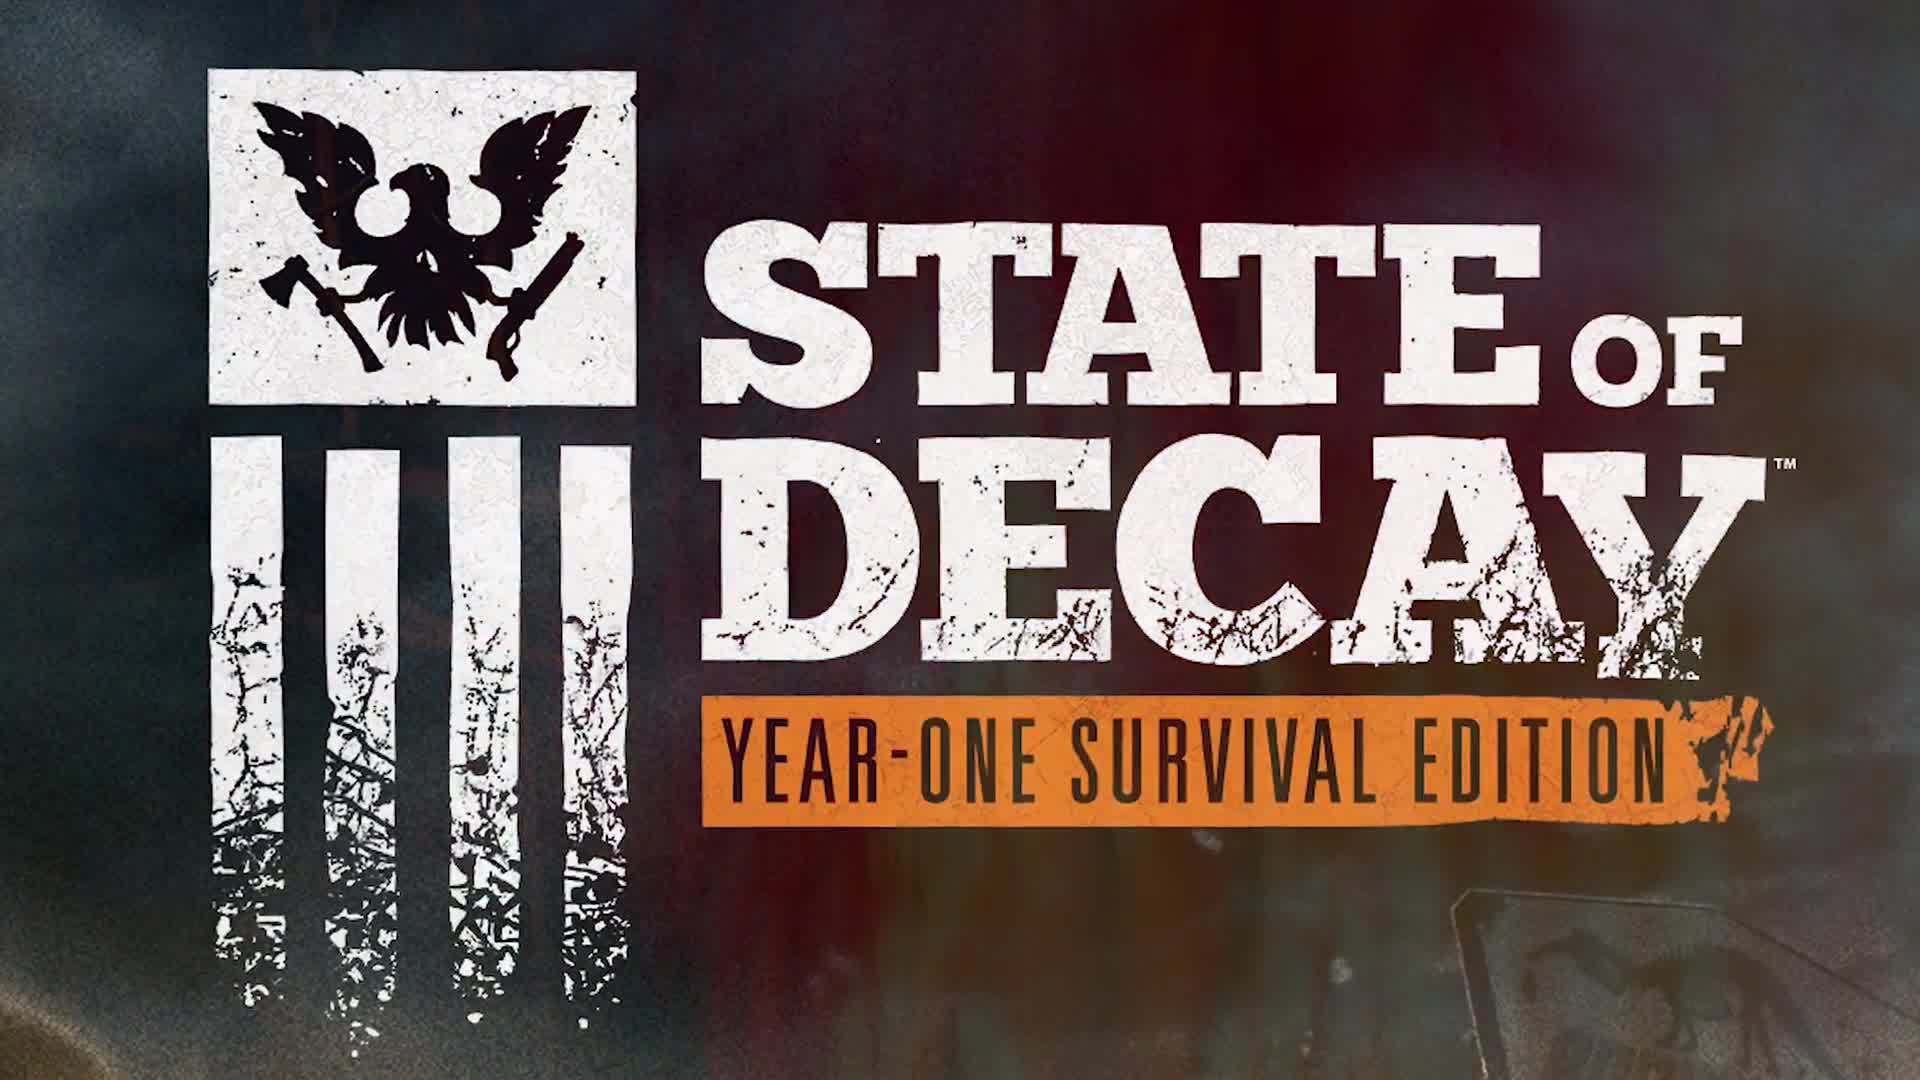 State of Decay Year-One survival edition